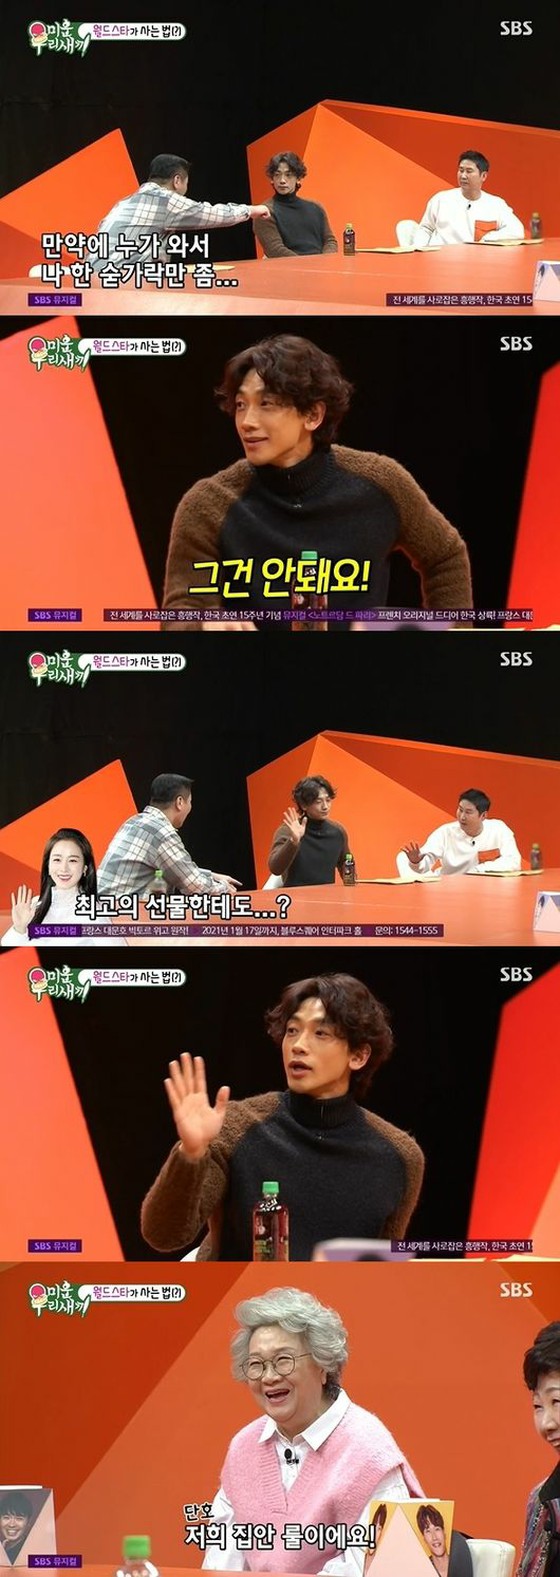 House rules that singer Rain (Bi) and wife Kim Tae Hee do not allow "only a bite"